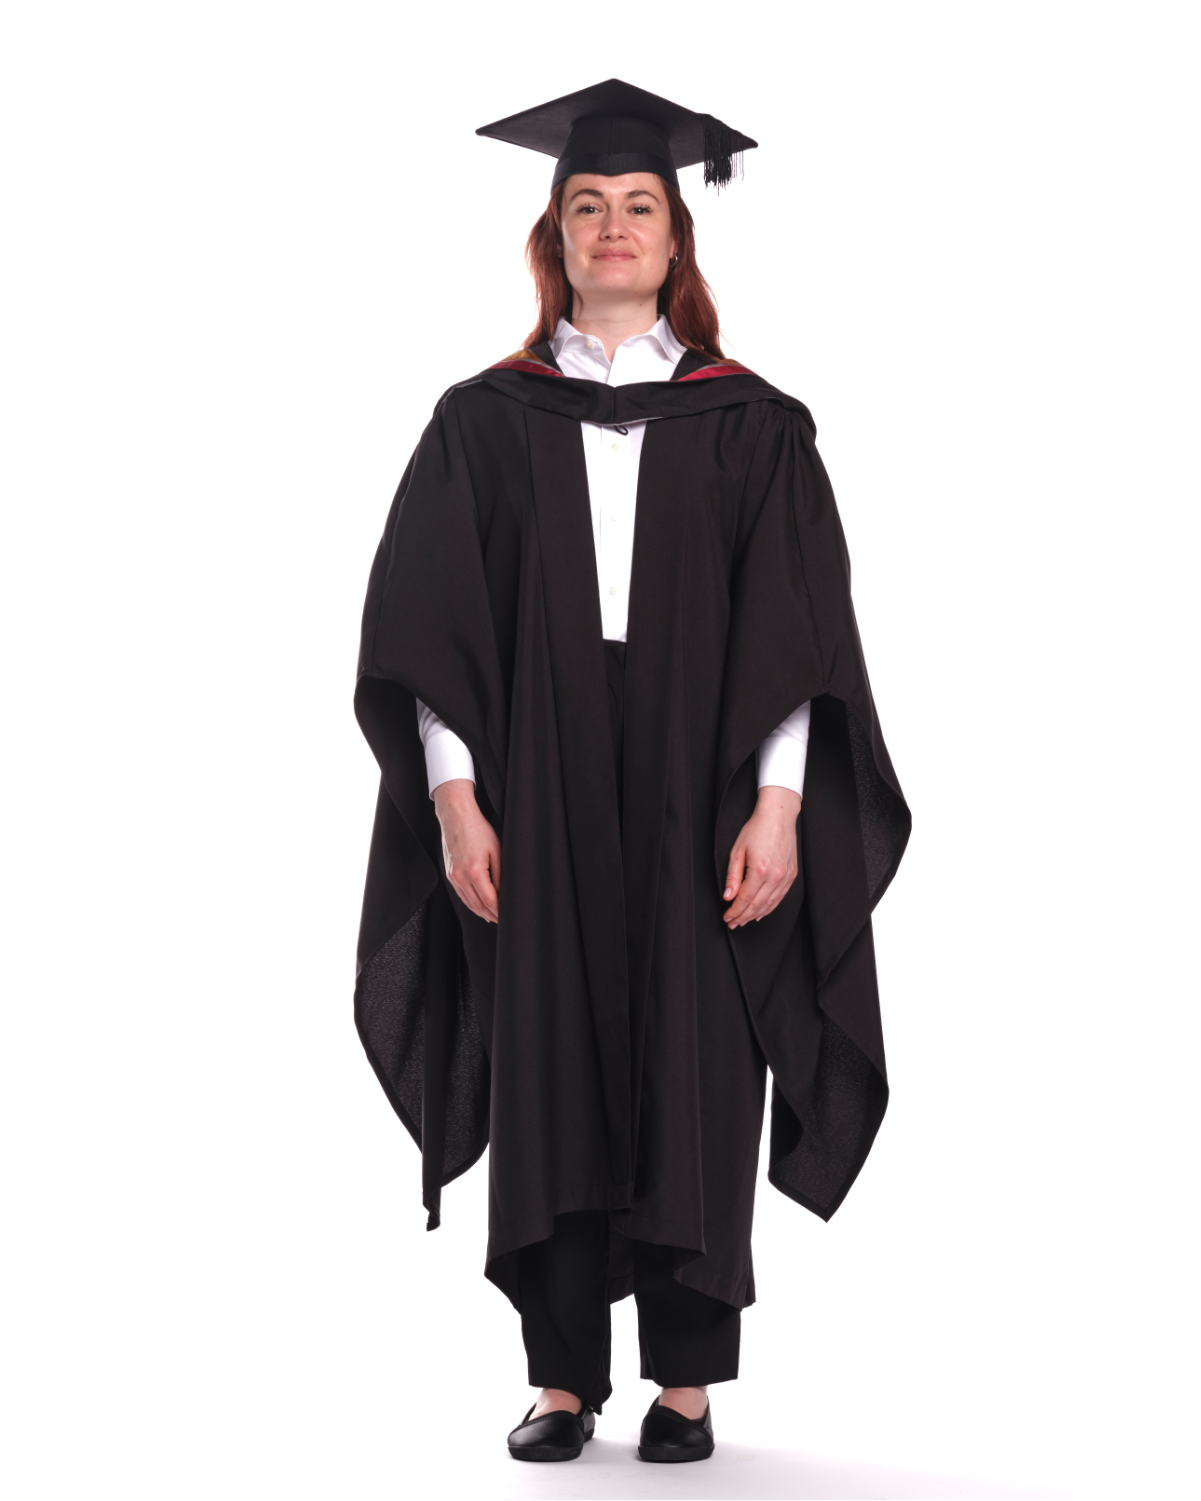 Lancaster University | BSc | Bachelor of Science Gown, Cap and Hood Set